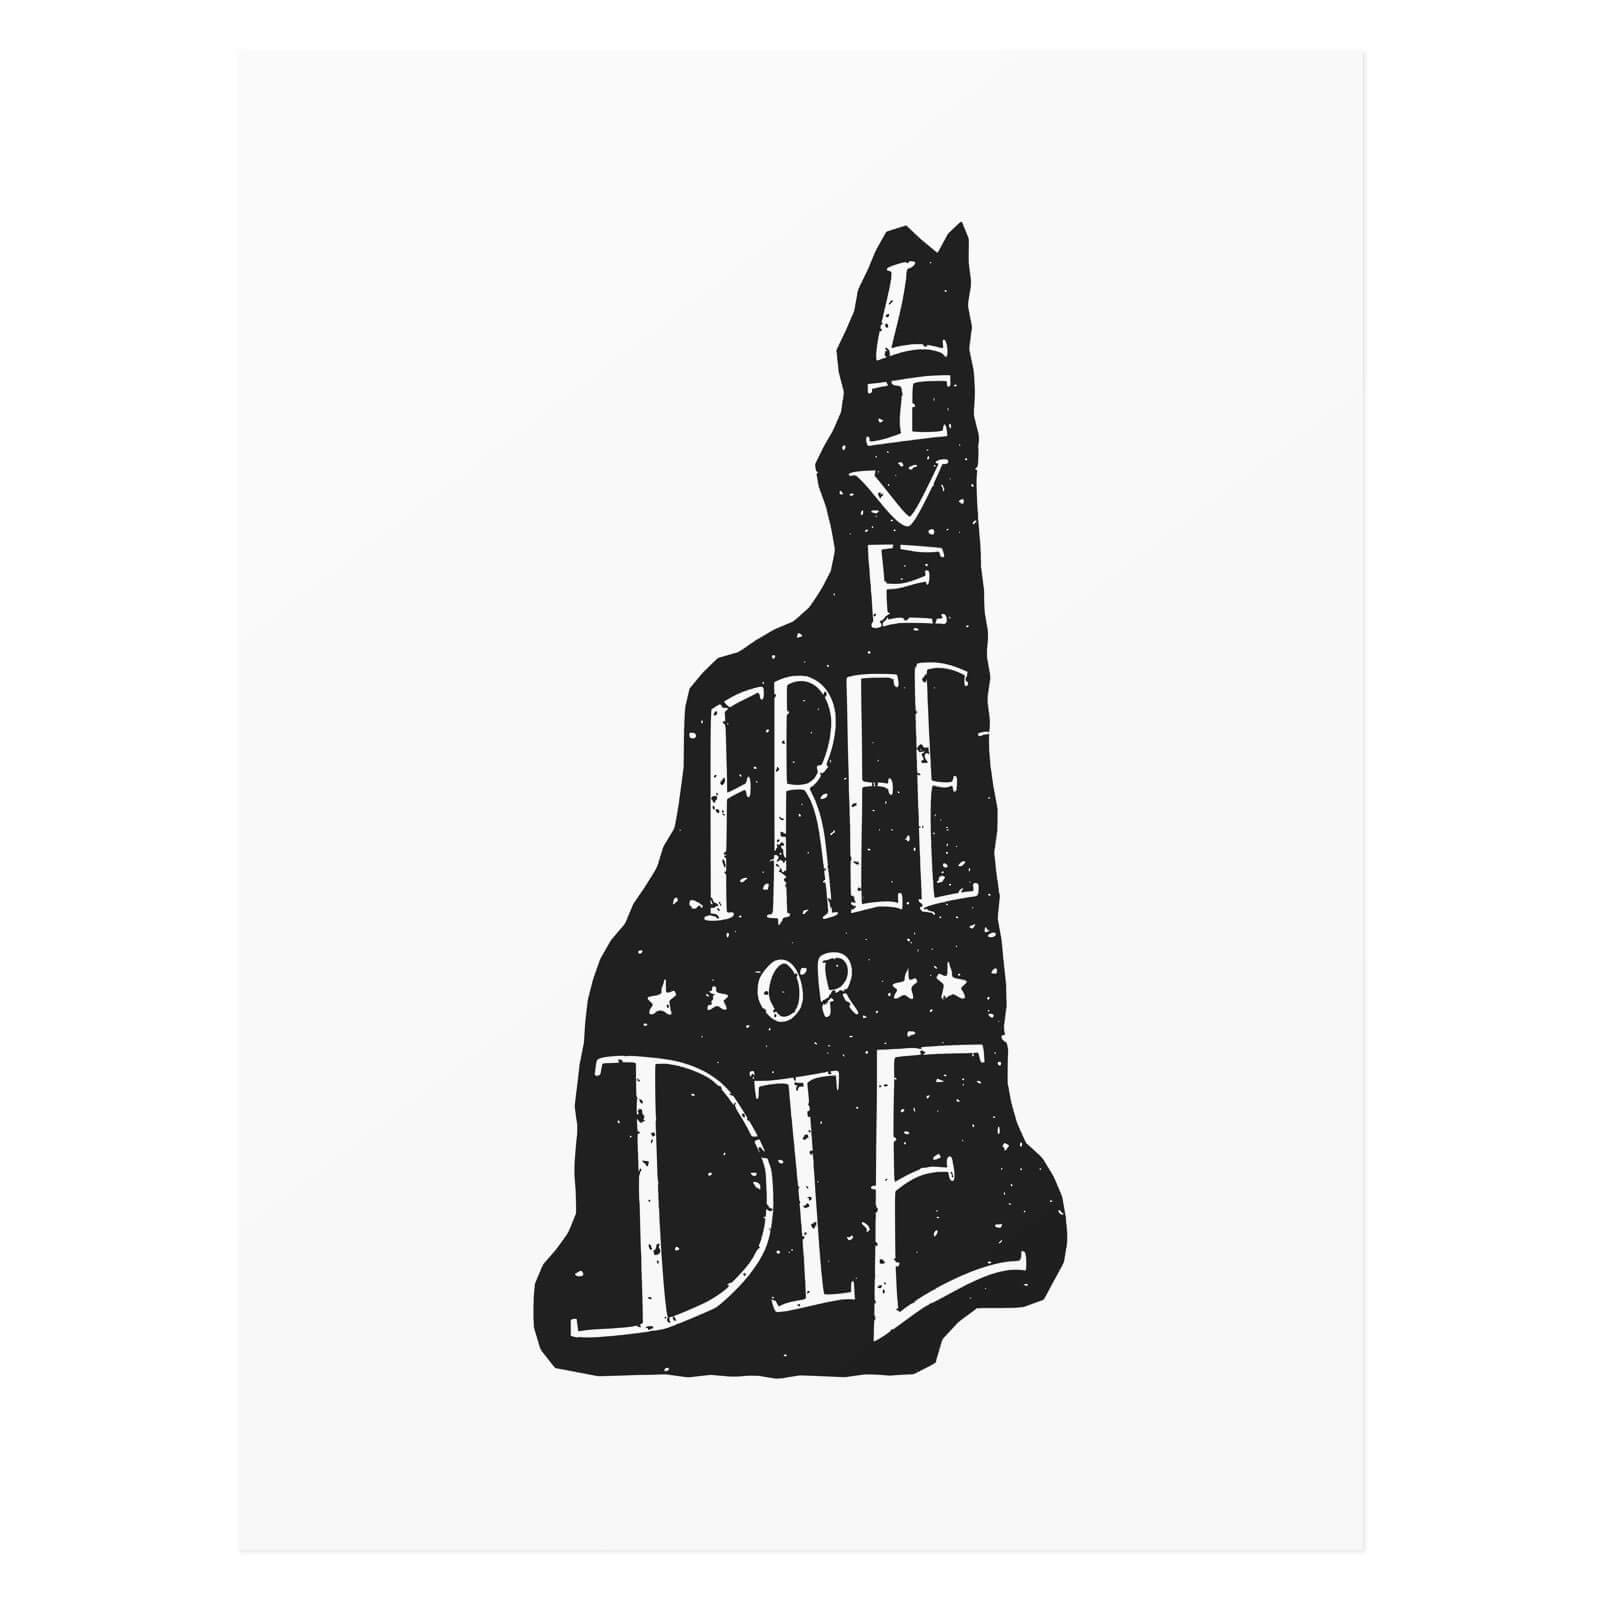 New Hampshire — Live free or die